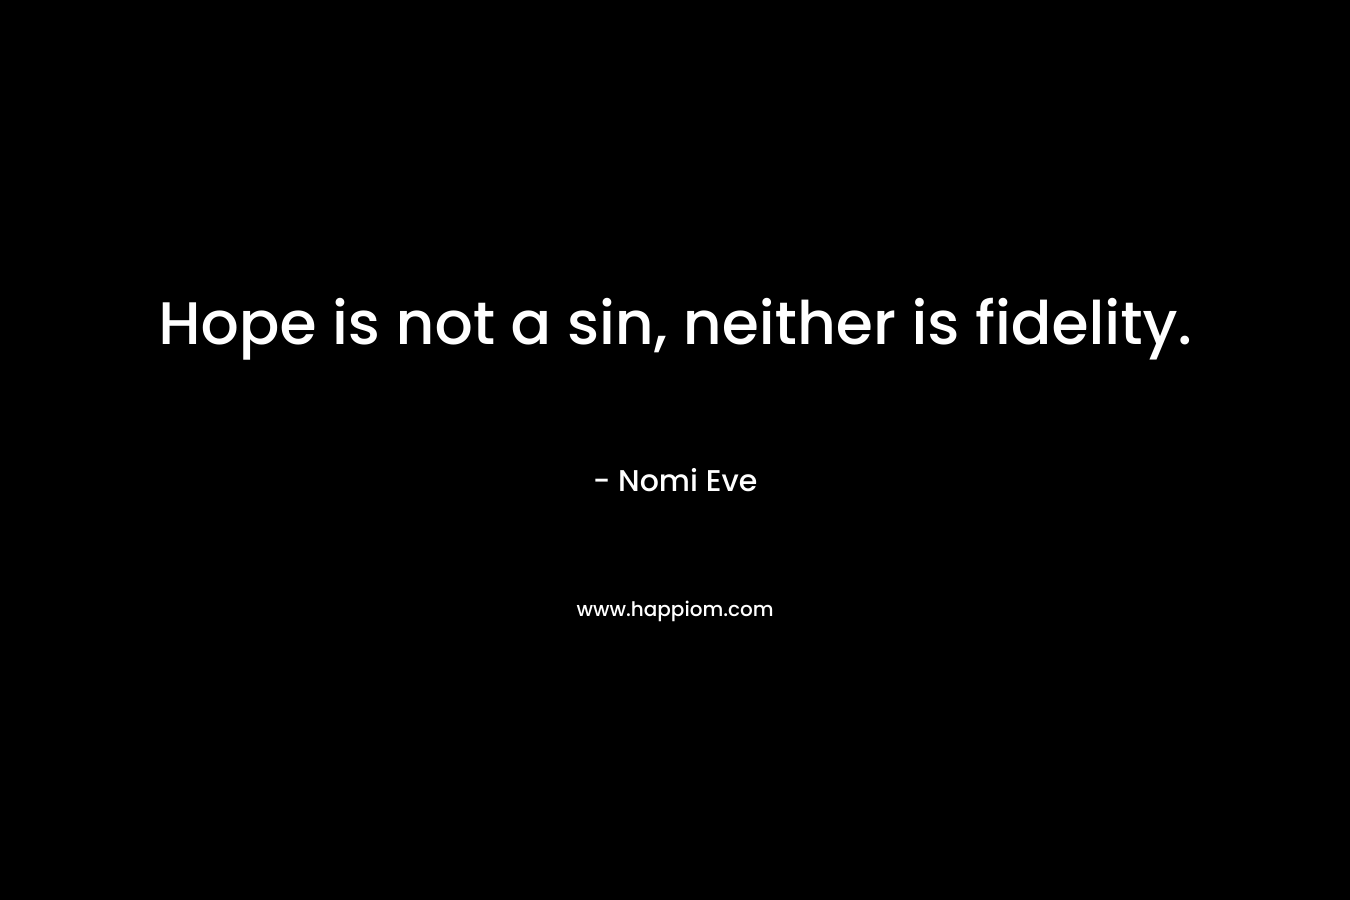 Hope is not a sin, neither is fidelity. – Nomi Eve